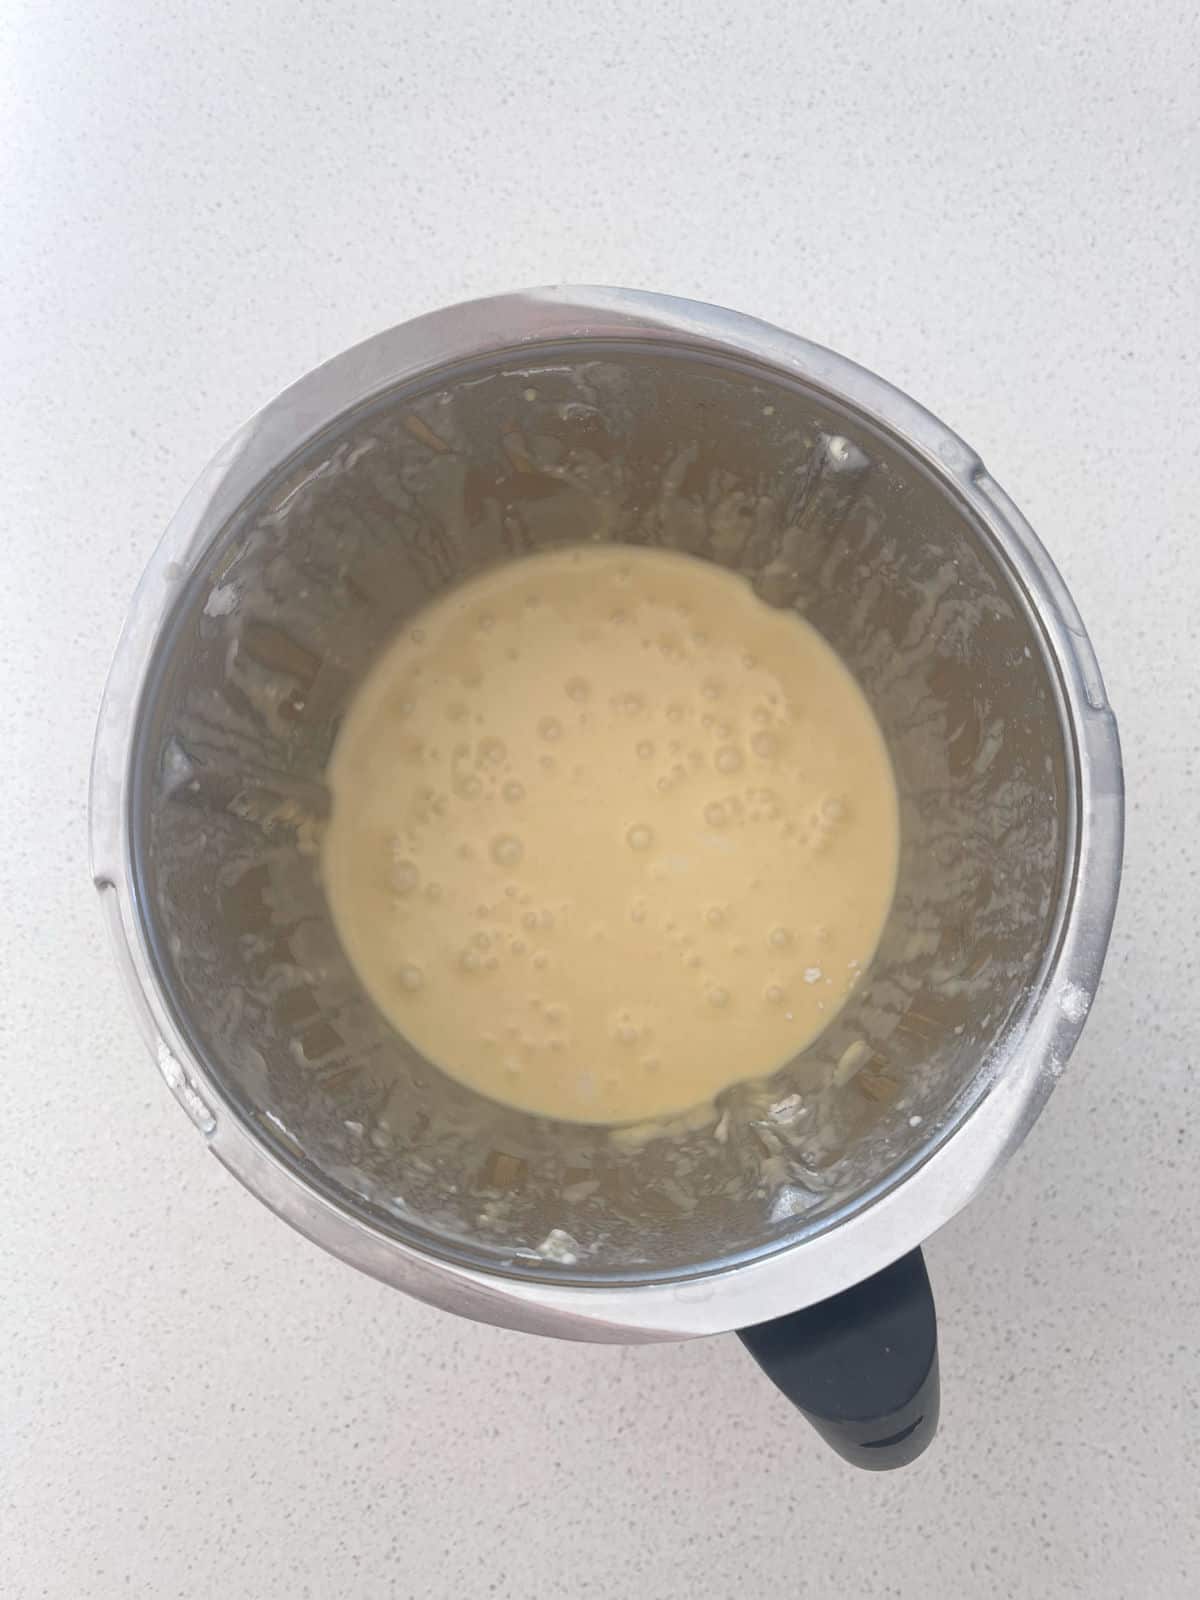 Waffle batter in a thermomix bowl.